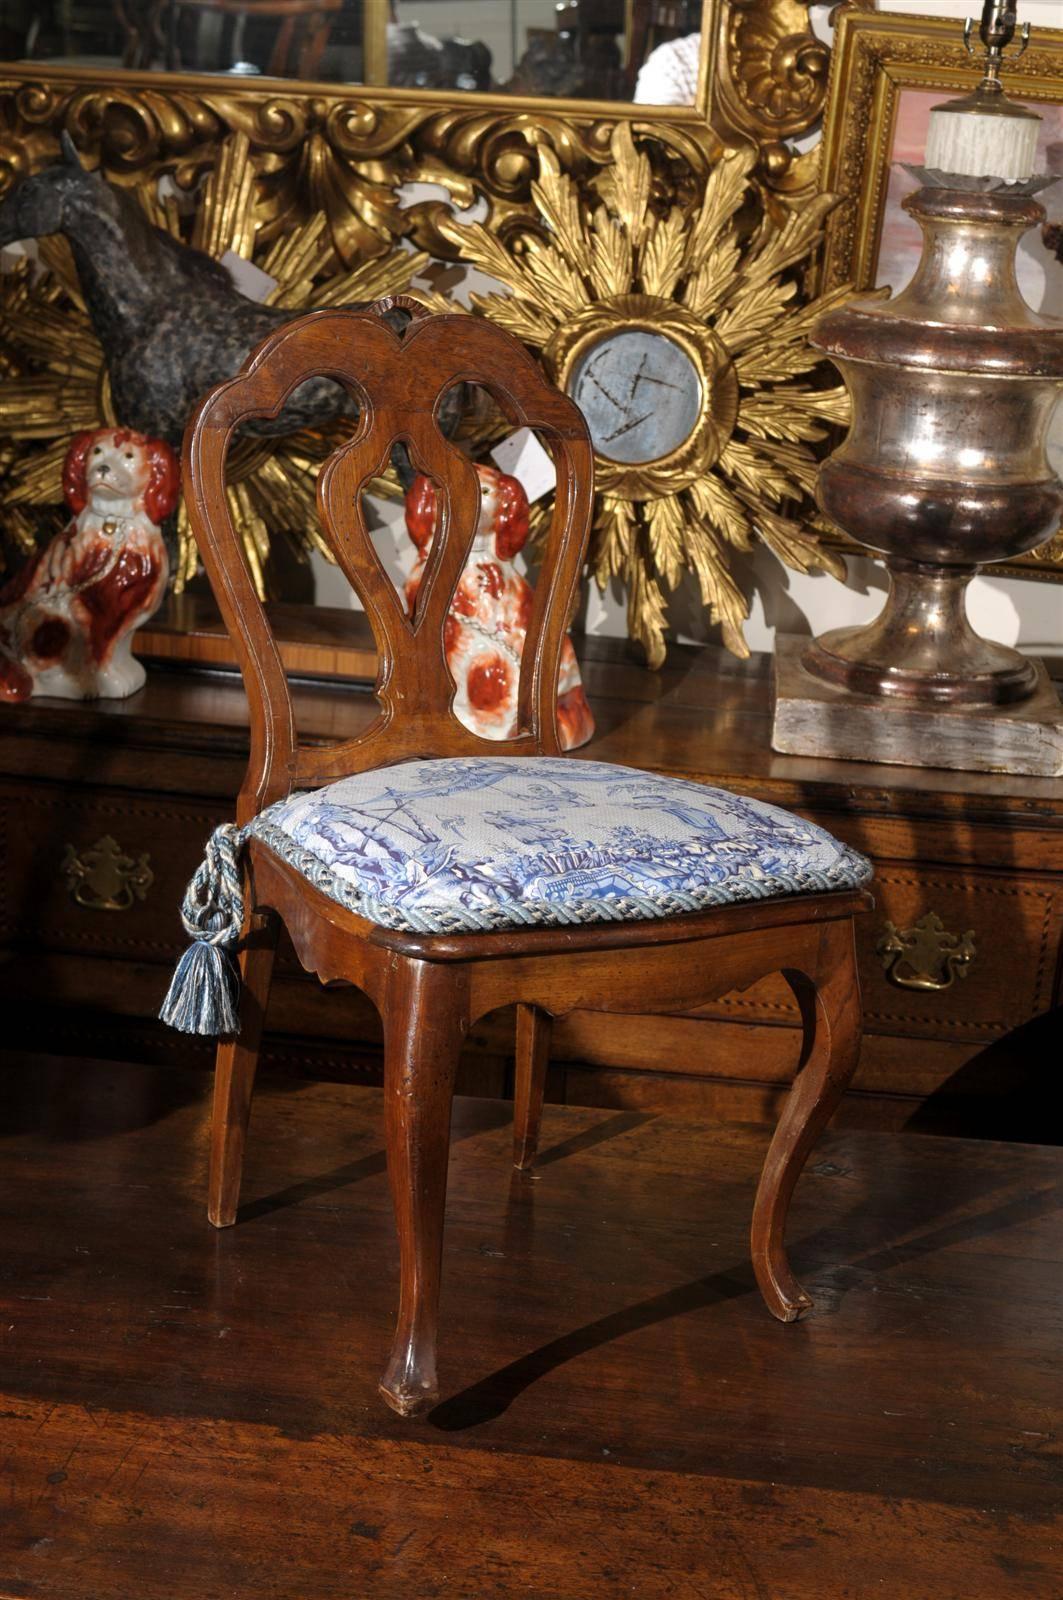 This French walnut child's chair from the 19th century features a slightly slanted and curved back with pierced splat. This small size side chair from circa 1860-1870 is raised on two cabriole legs in the front, reminiscent of the Louis XV era, and